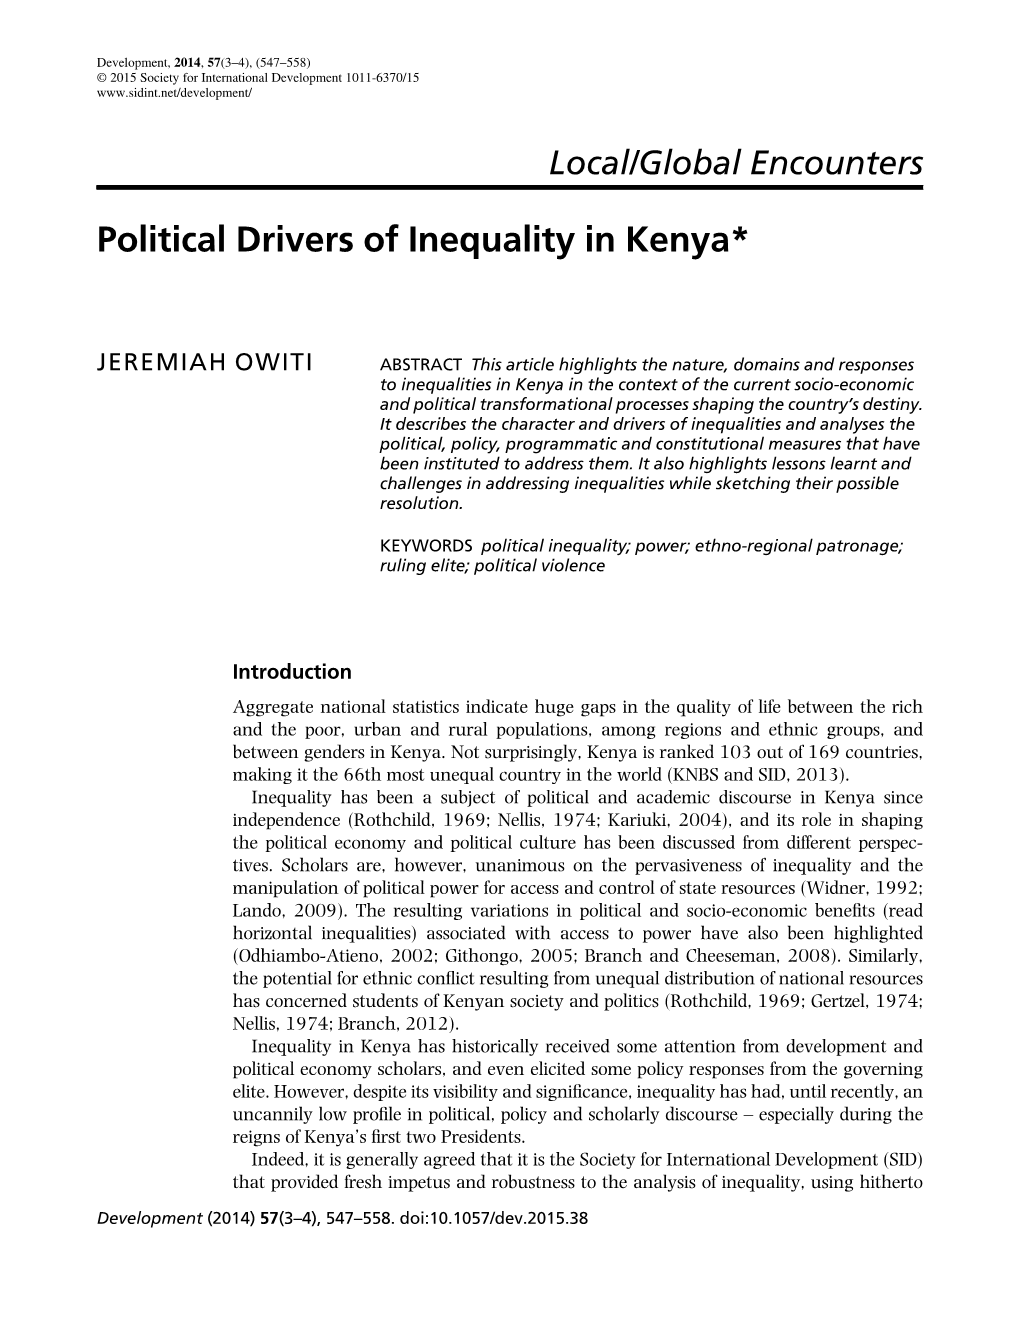 Political Drivers of Inequality in Kenya*